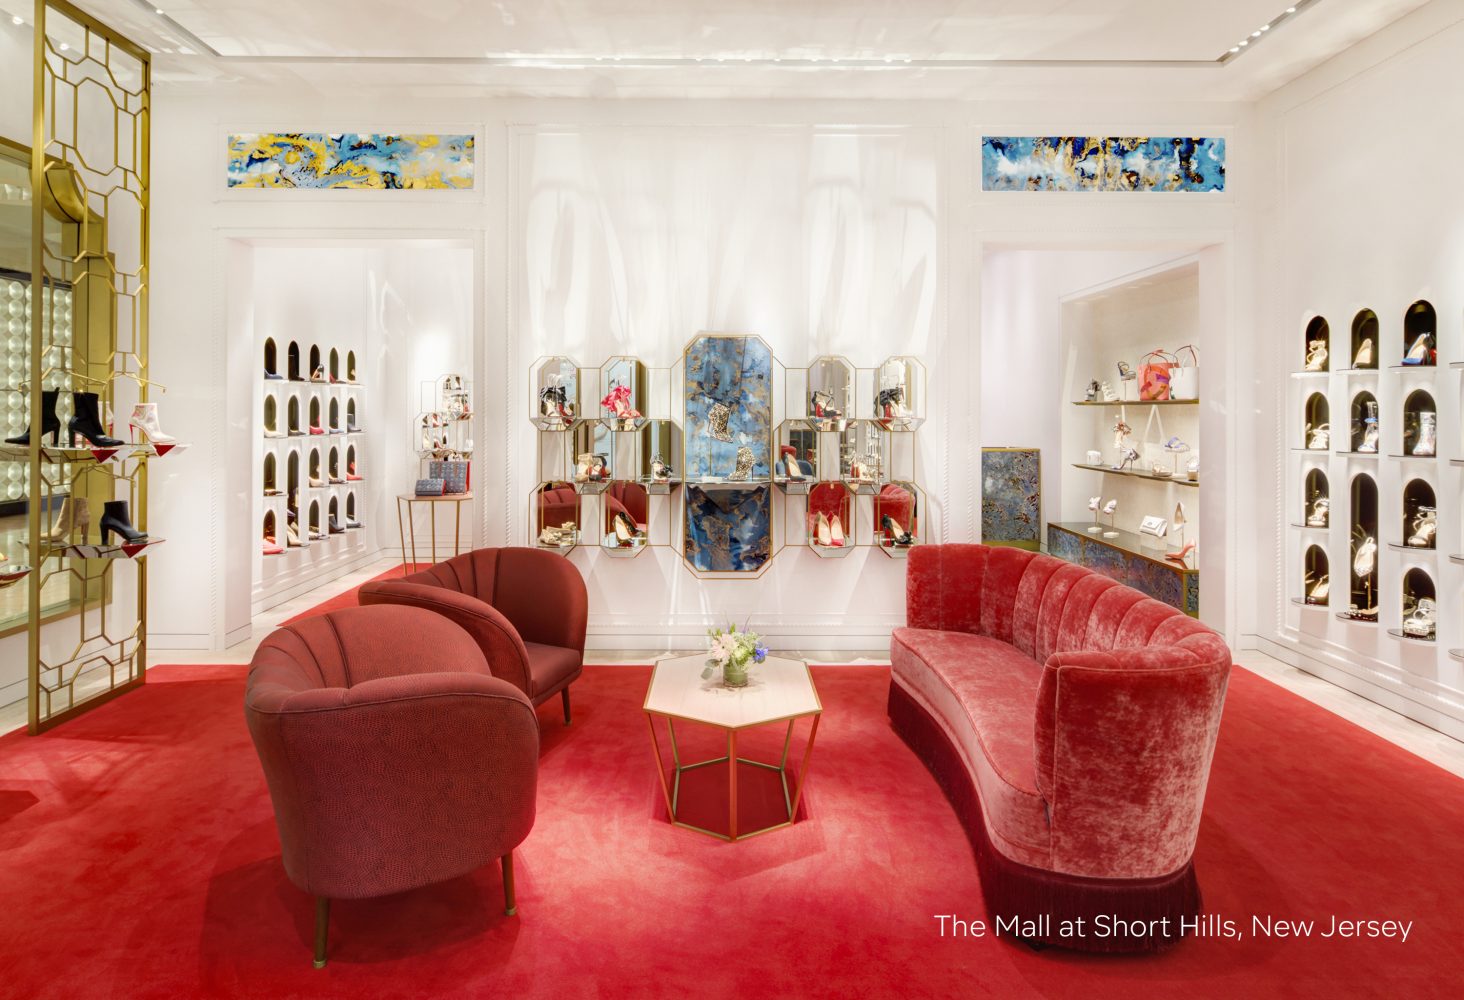 Seating area and shoe display found at Christian Louboutin concession, retail experience design, designed by Household.